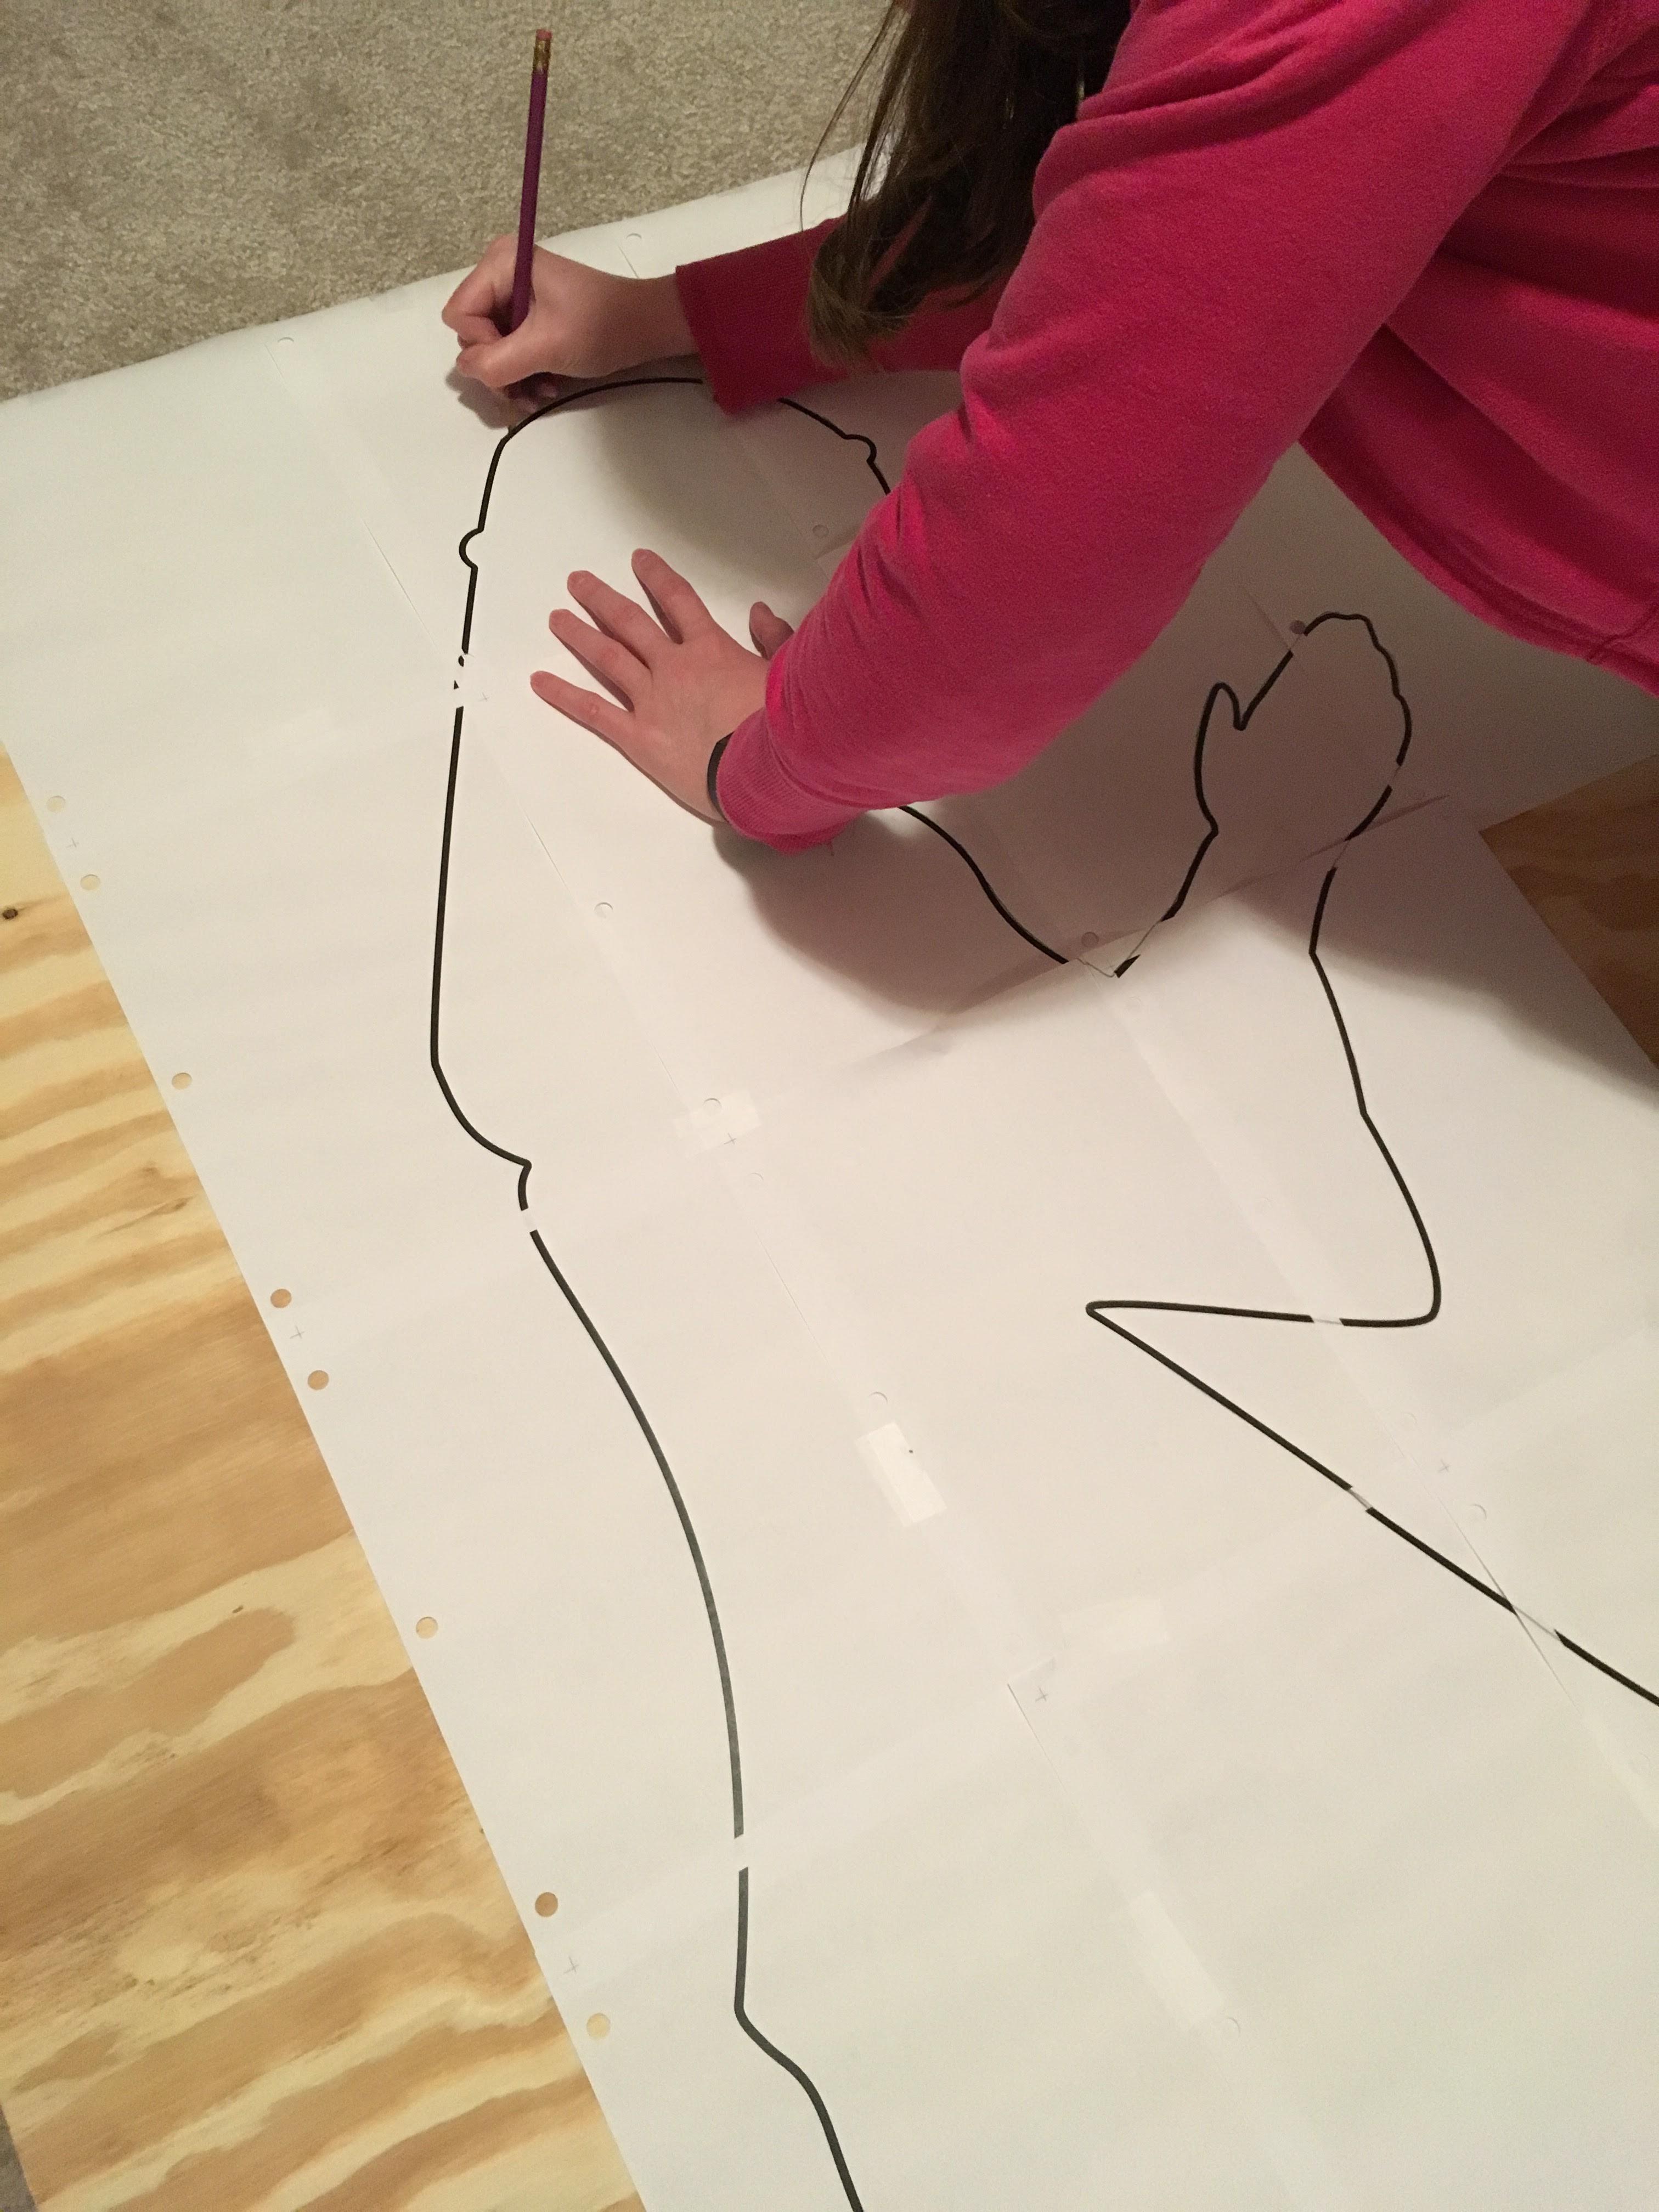 Tracing A Nativity Scene + Cook Portable Warehouses